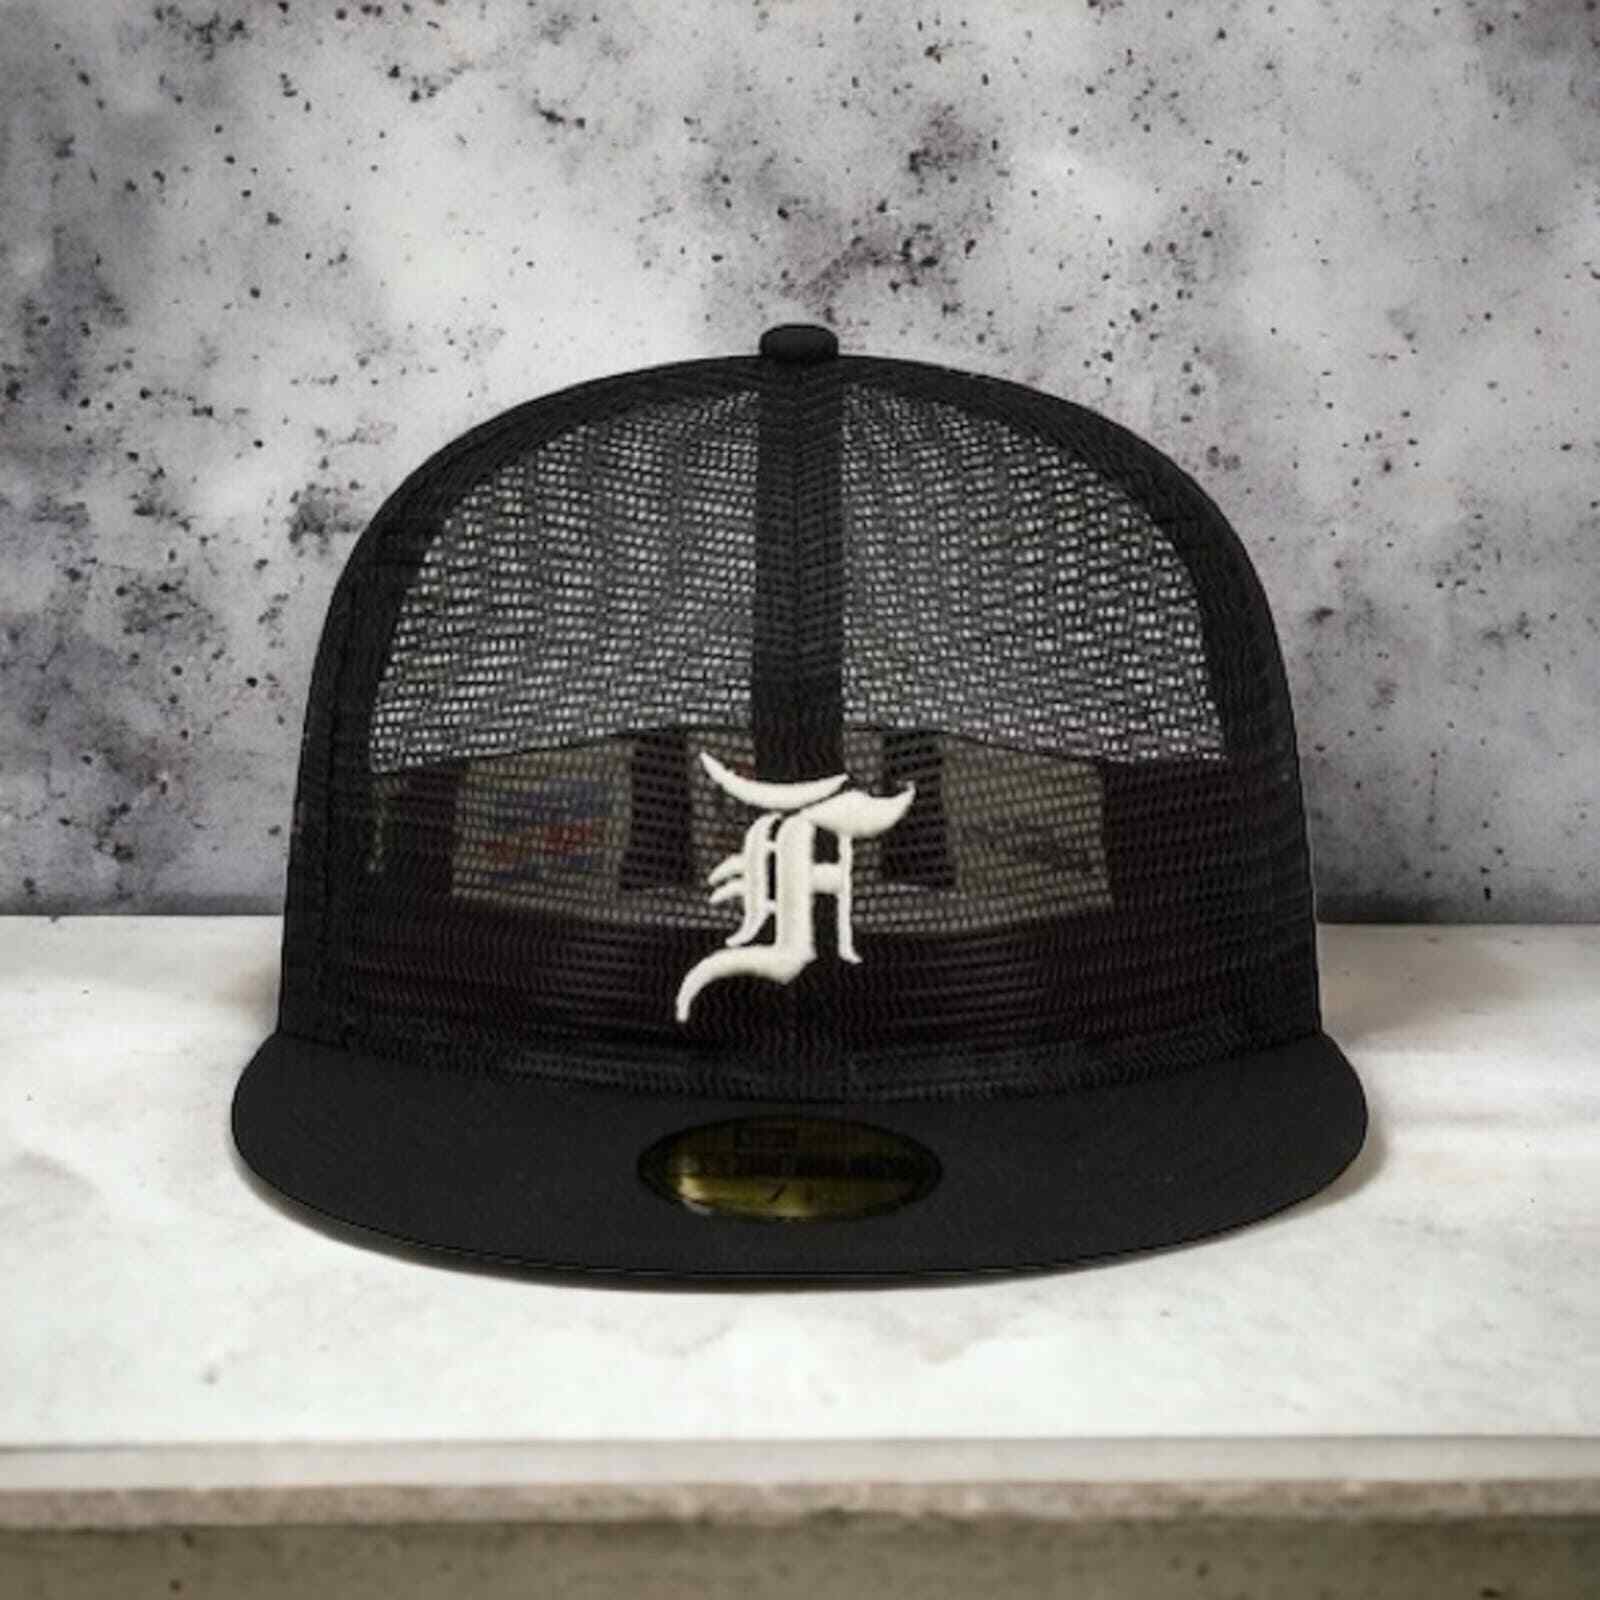 NWT New Era x Fear of God Mesh 59FIFTY MLB Fitted Hat Black Size 7 3/8 MSRP $65